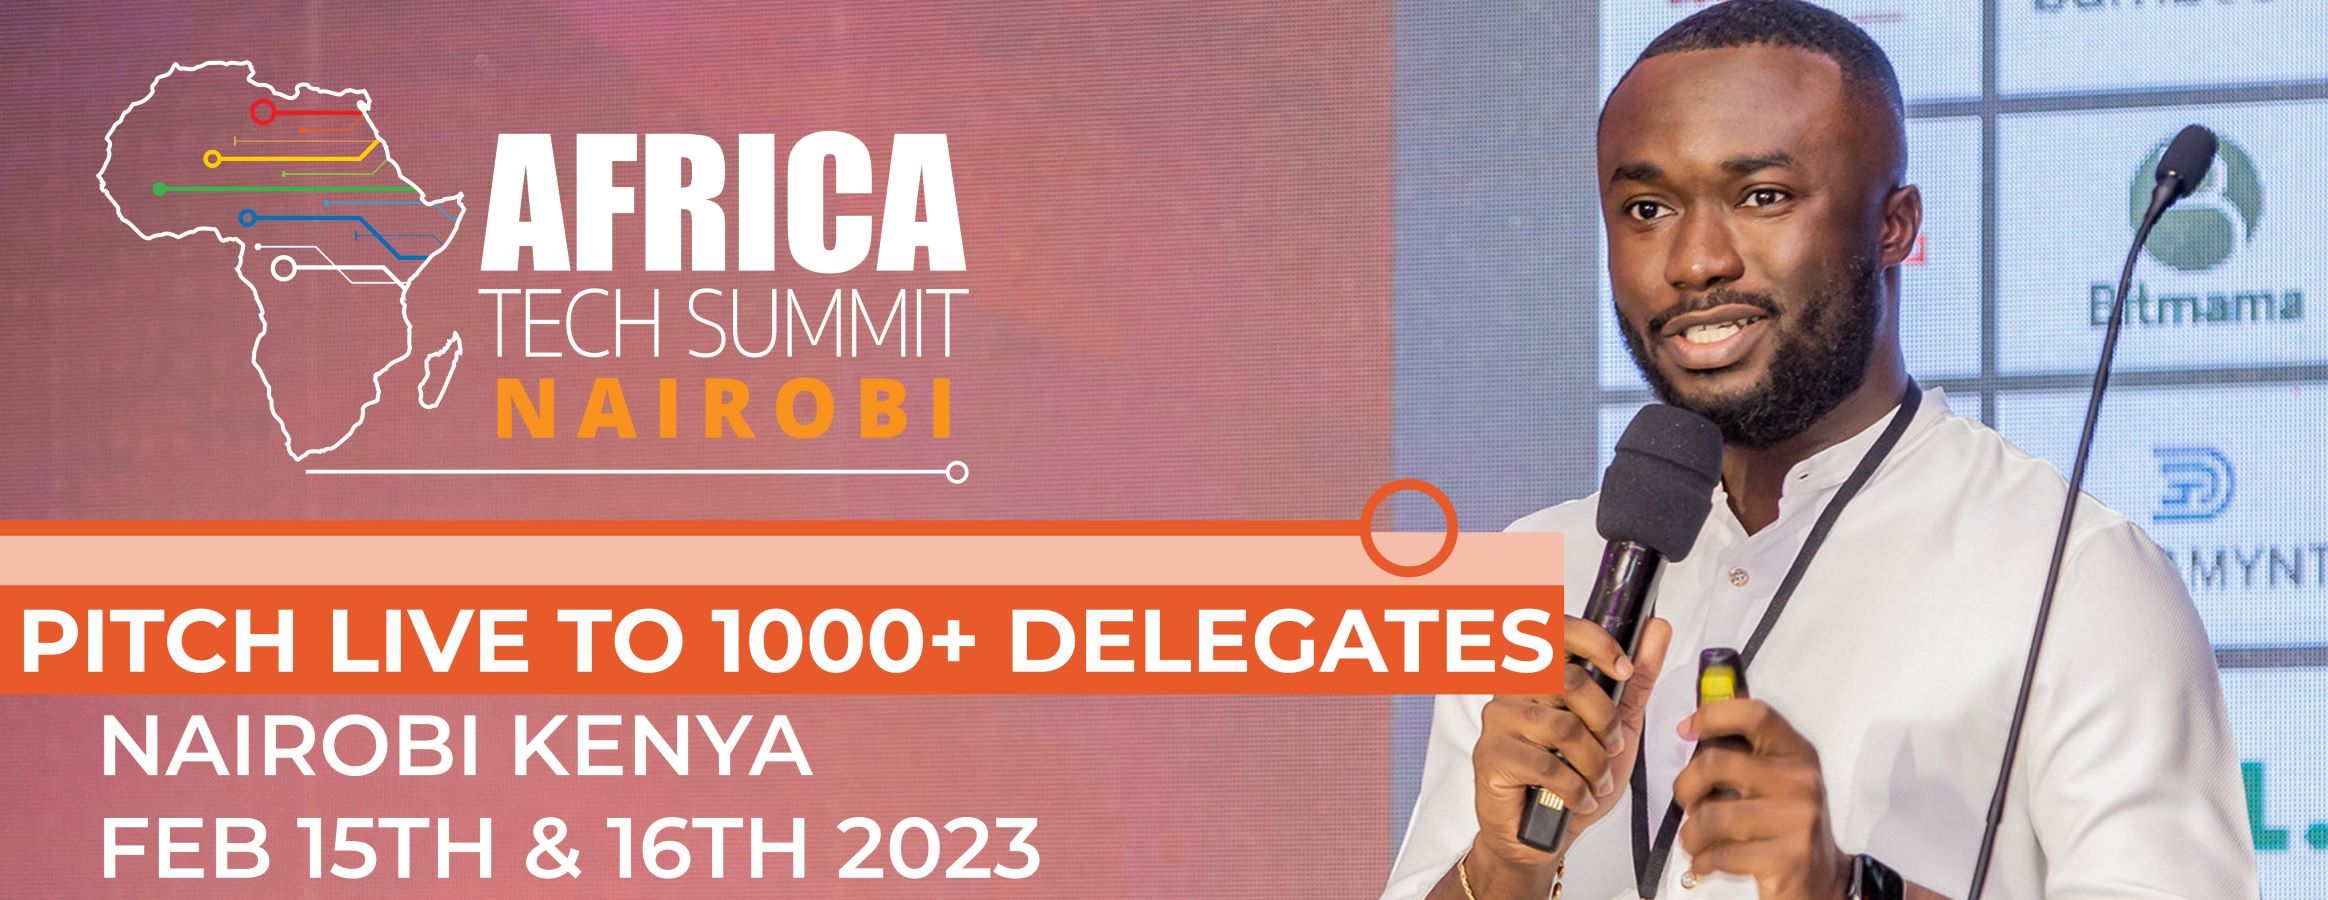 Africa Tech Summit hosts the fifth edition of Pitch Live, showcasing leading start-up ventures from across Africa to an audience of 1000+ investors, corporates and delegate